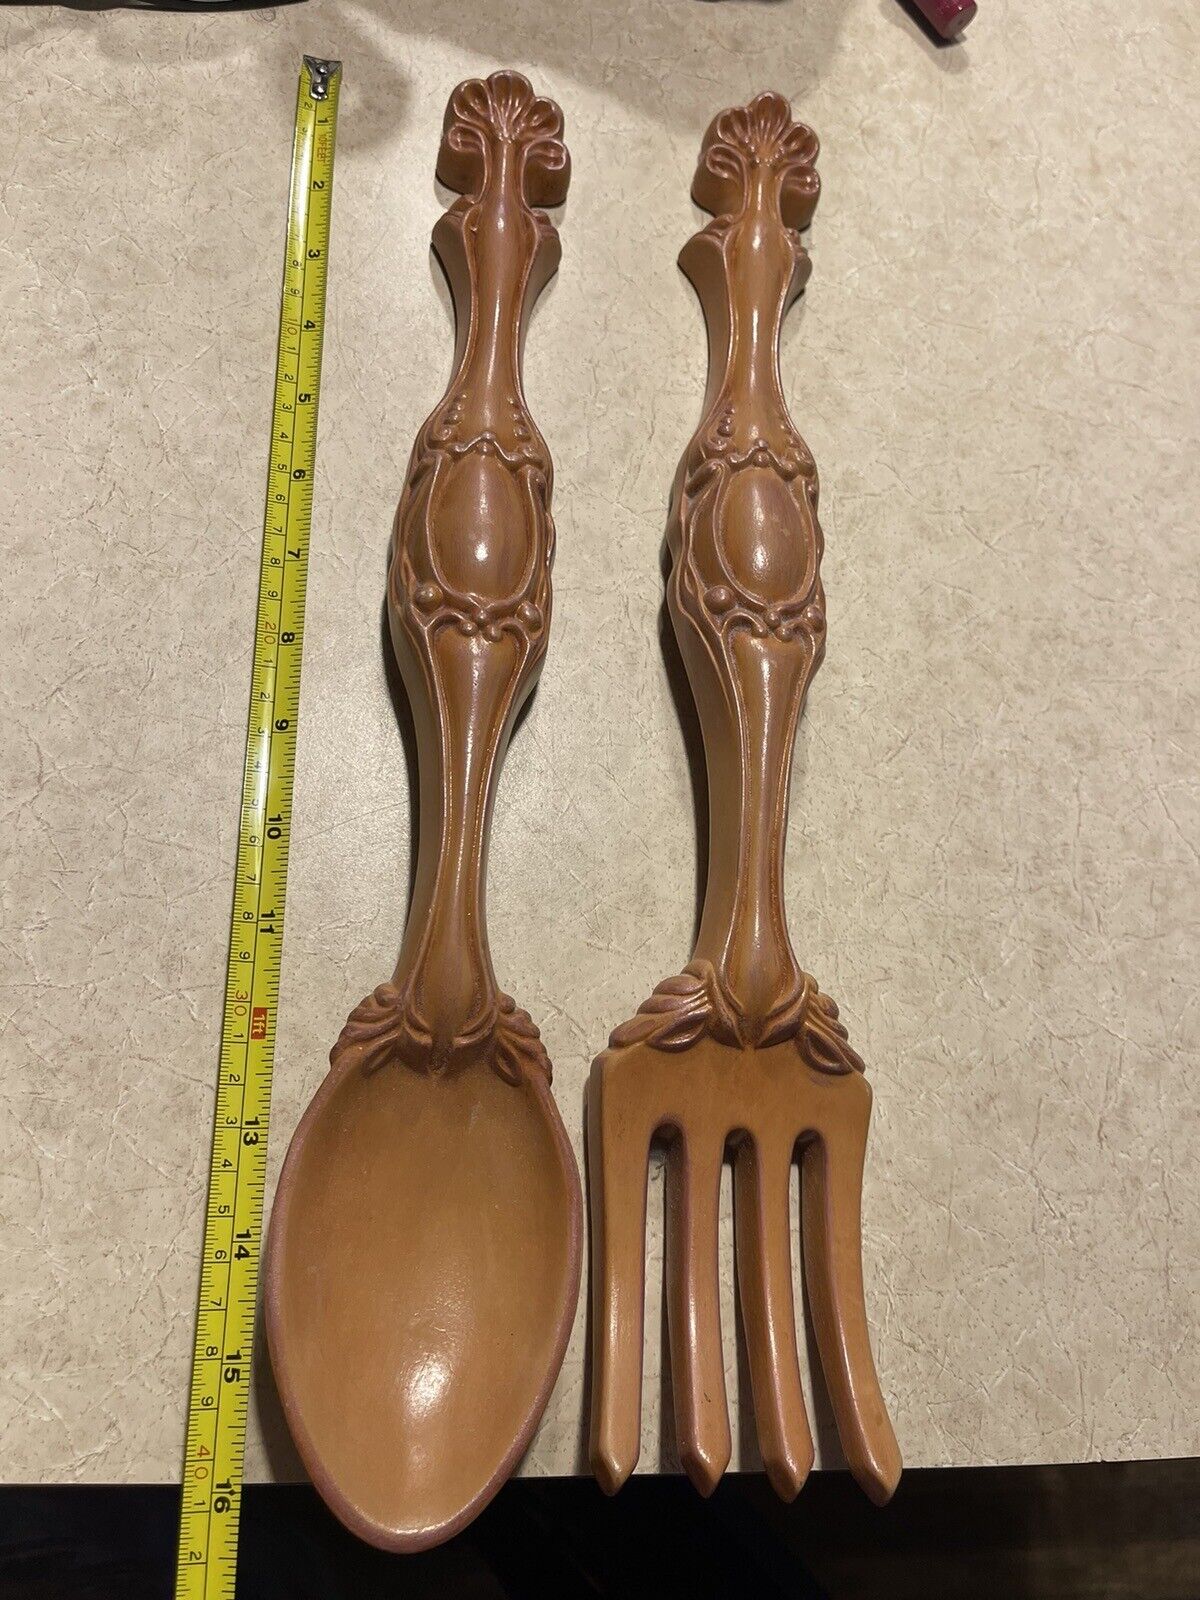 Vintage Arnel's Fork and Spoon Wall Hanging Ceramic 16’ Kitchen Decor